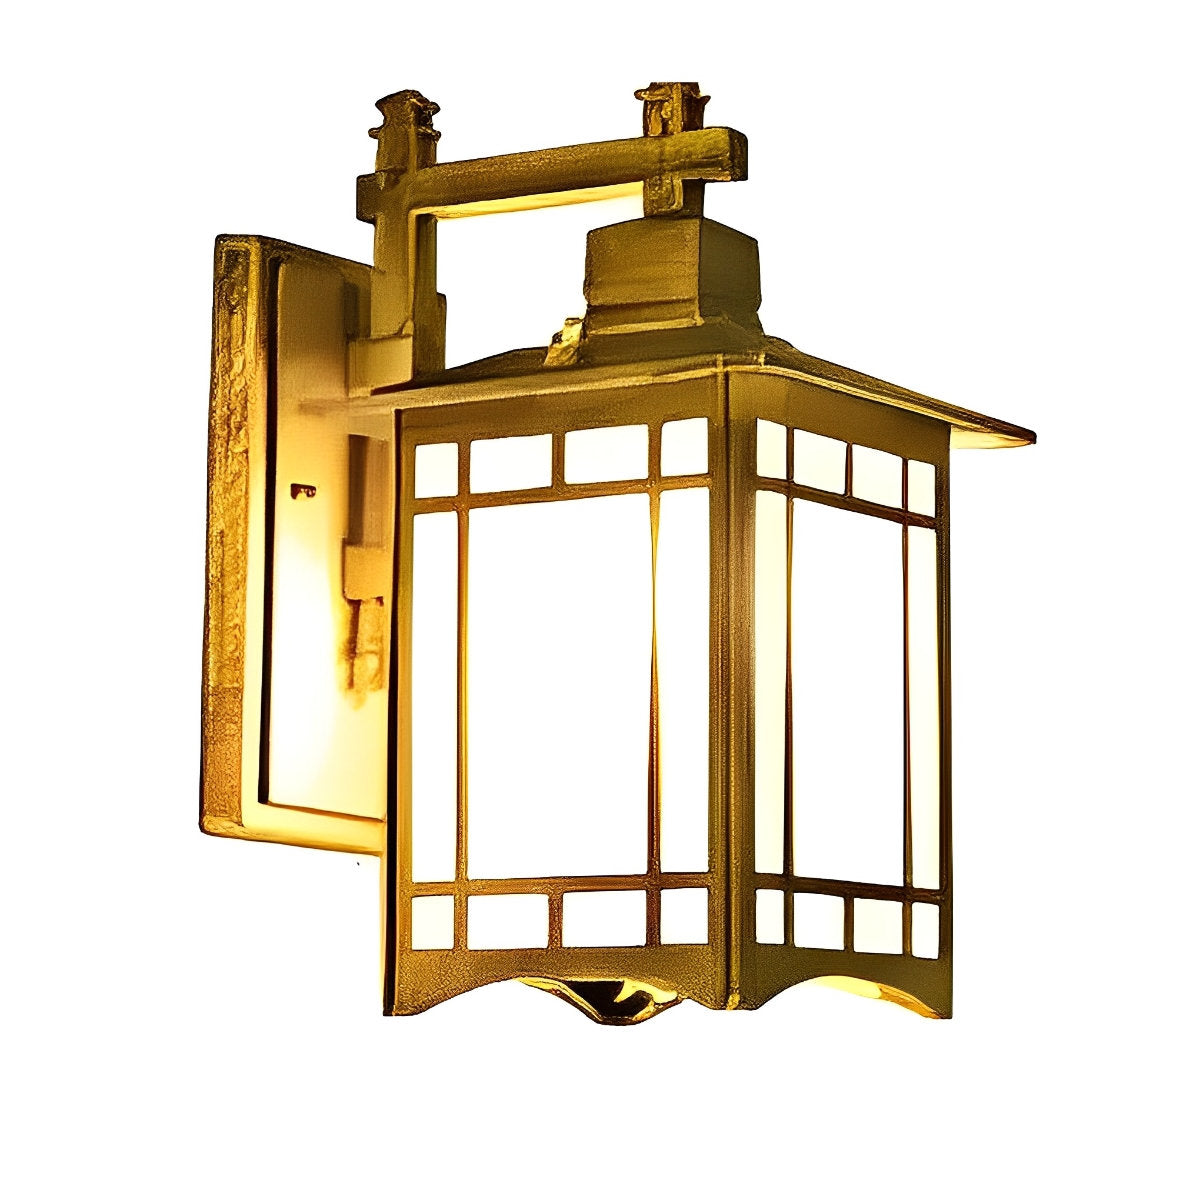 Retro Waterproof LED Vintage Solar Wall Lamp with Remote Wall Sconce Lighting - Flyachilles